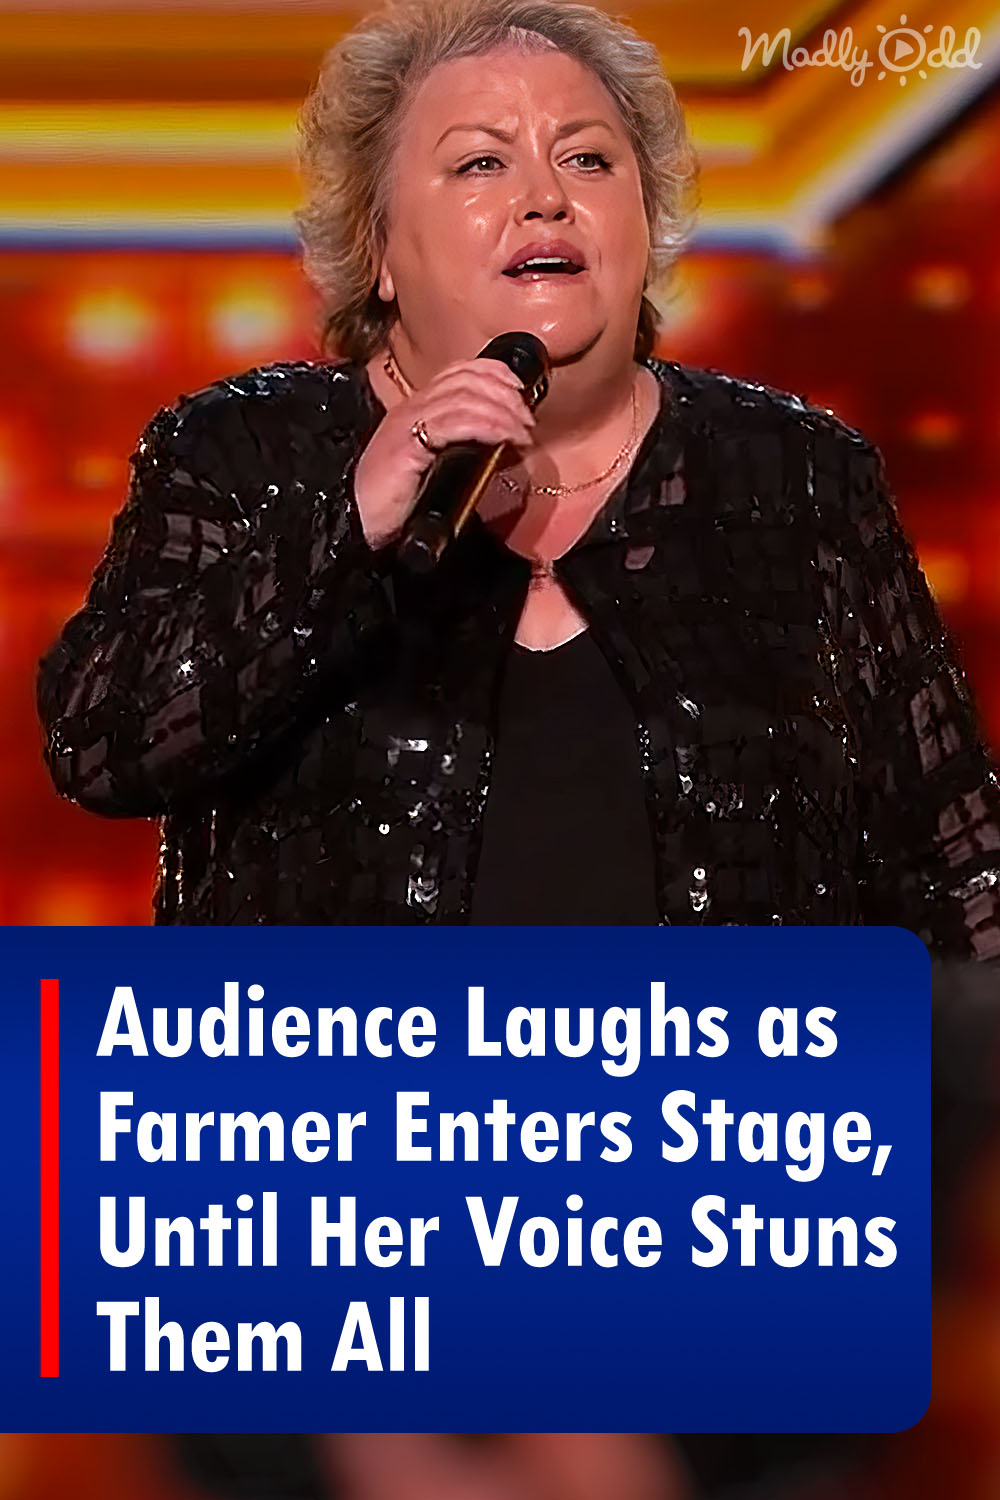 Audience Laughs as Farmer Enters Stage, Until Her Voice Stuns Them All